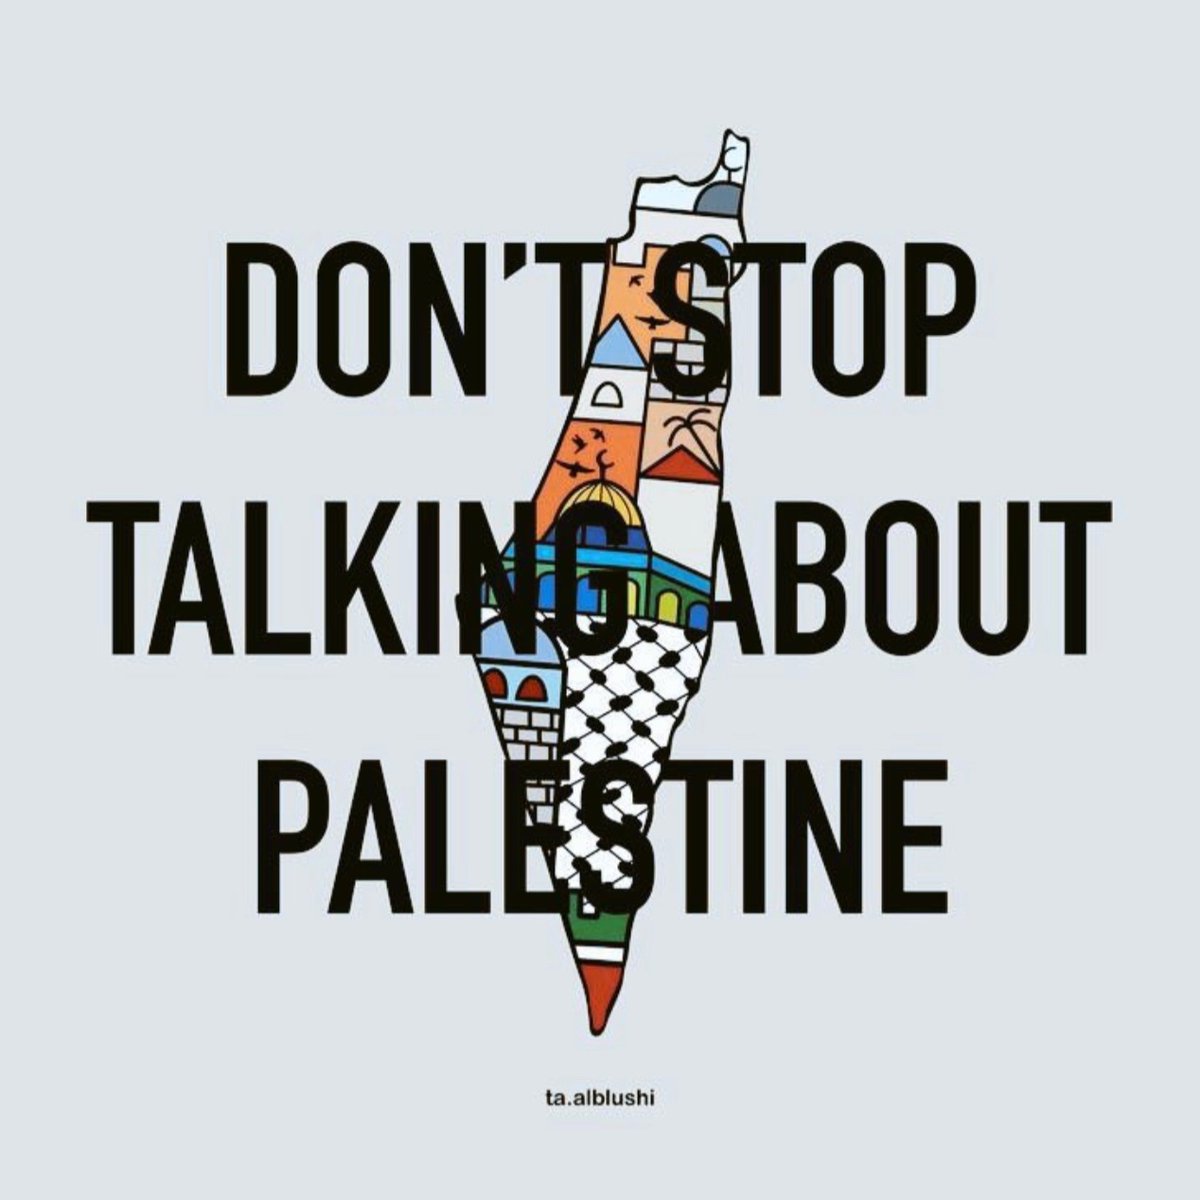 Indeed! Whether it's a another Country, State, Organisation or a Social Media Company that they can't control it becomes the Enemy! ✊🇵🇸👍🇵🇸💯 #FreePalestine #CeasefireNOW #GazaGenocide #ZionistWarCrimes #ZionistTerrorists #ZionistBarbarians #ZionistApartheid #ZionistThieves